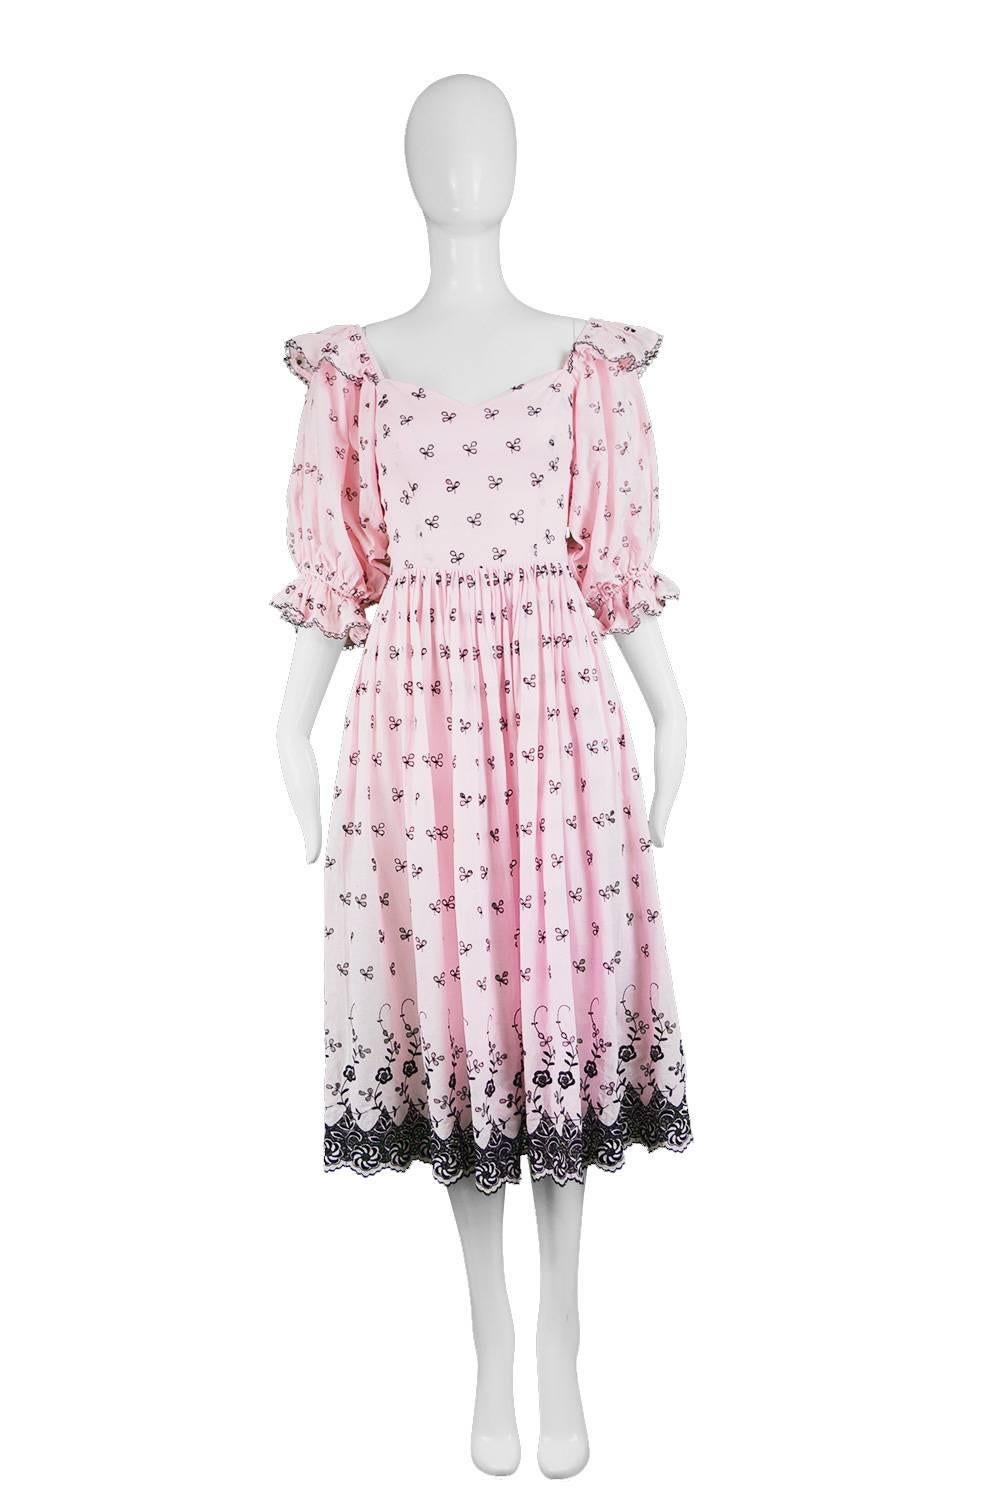 Click 'CONTINUE READING' below to see size & description. 

A romantic vintage women's off the shoulder dress from the 80s by David & Elizabeth Emanuel for their boutique label. The Emanuels were best known for their luxurious and feminine gowns,